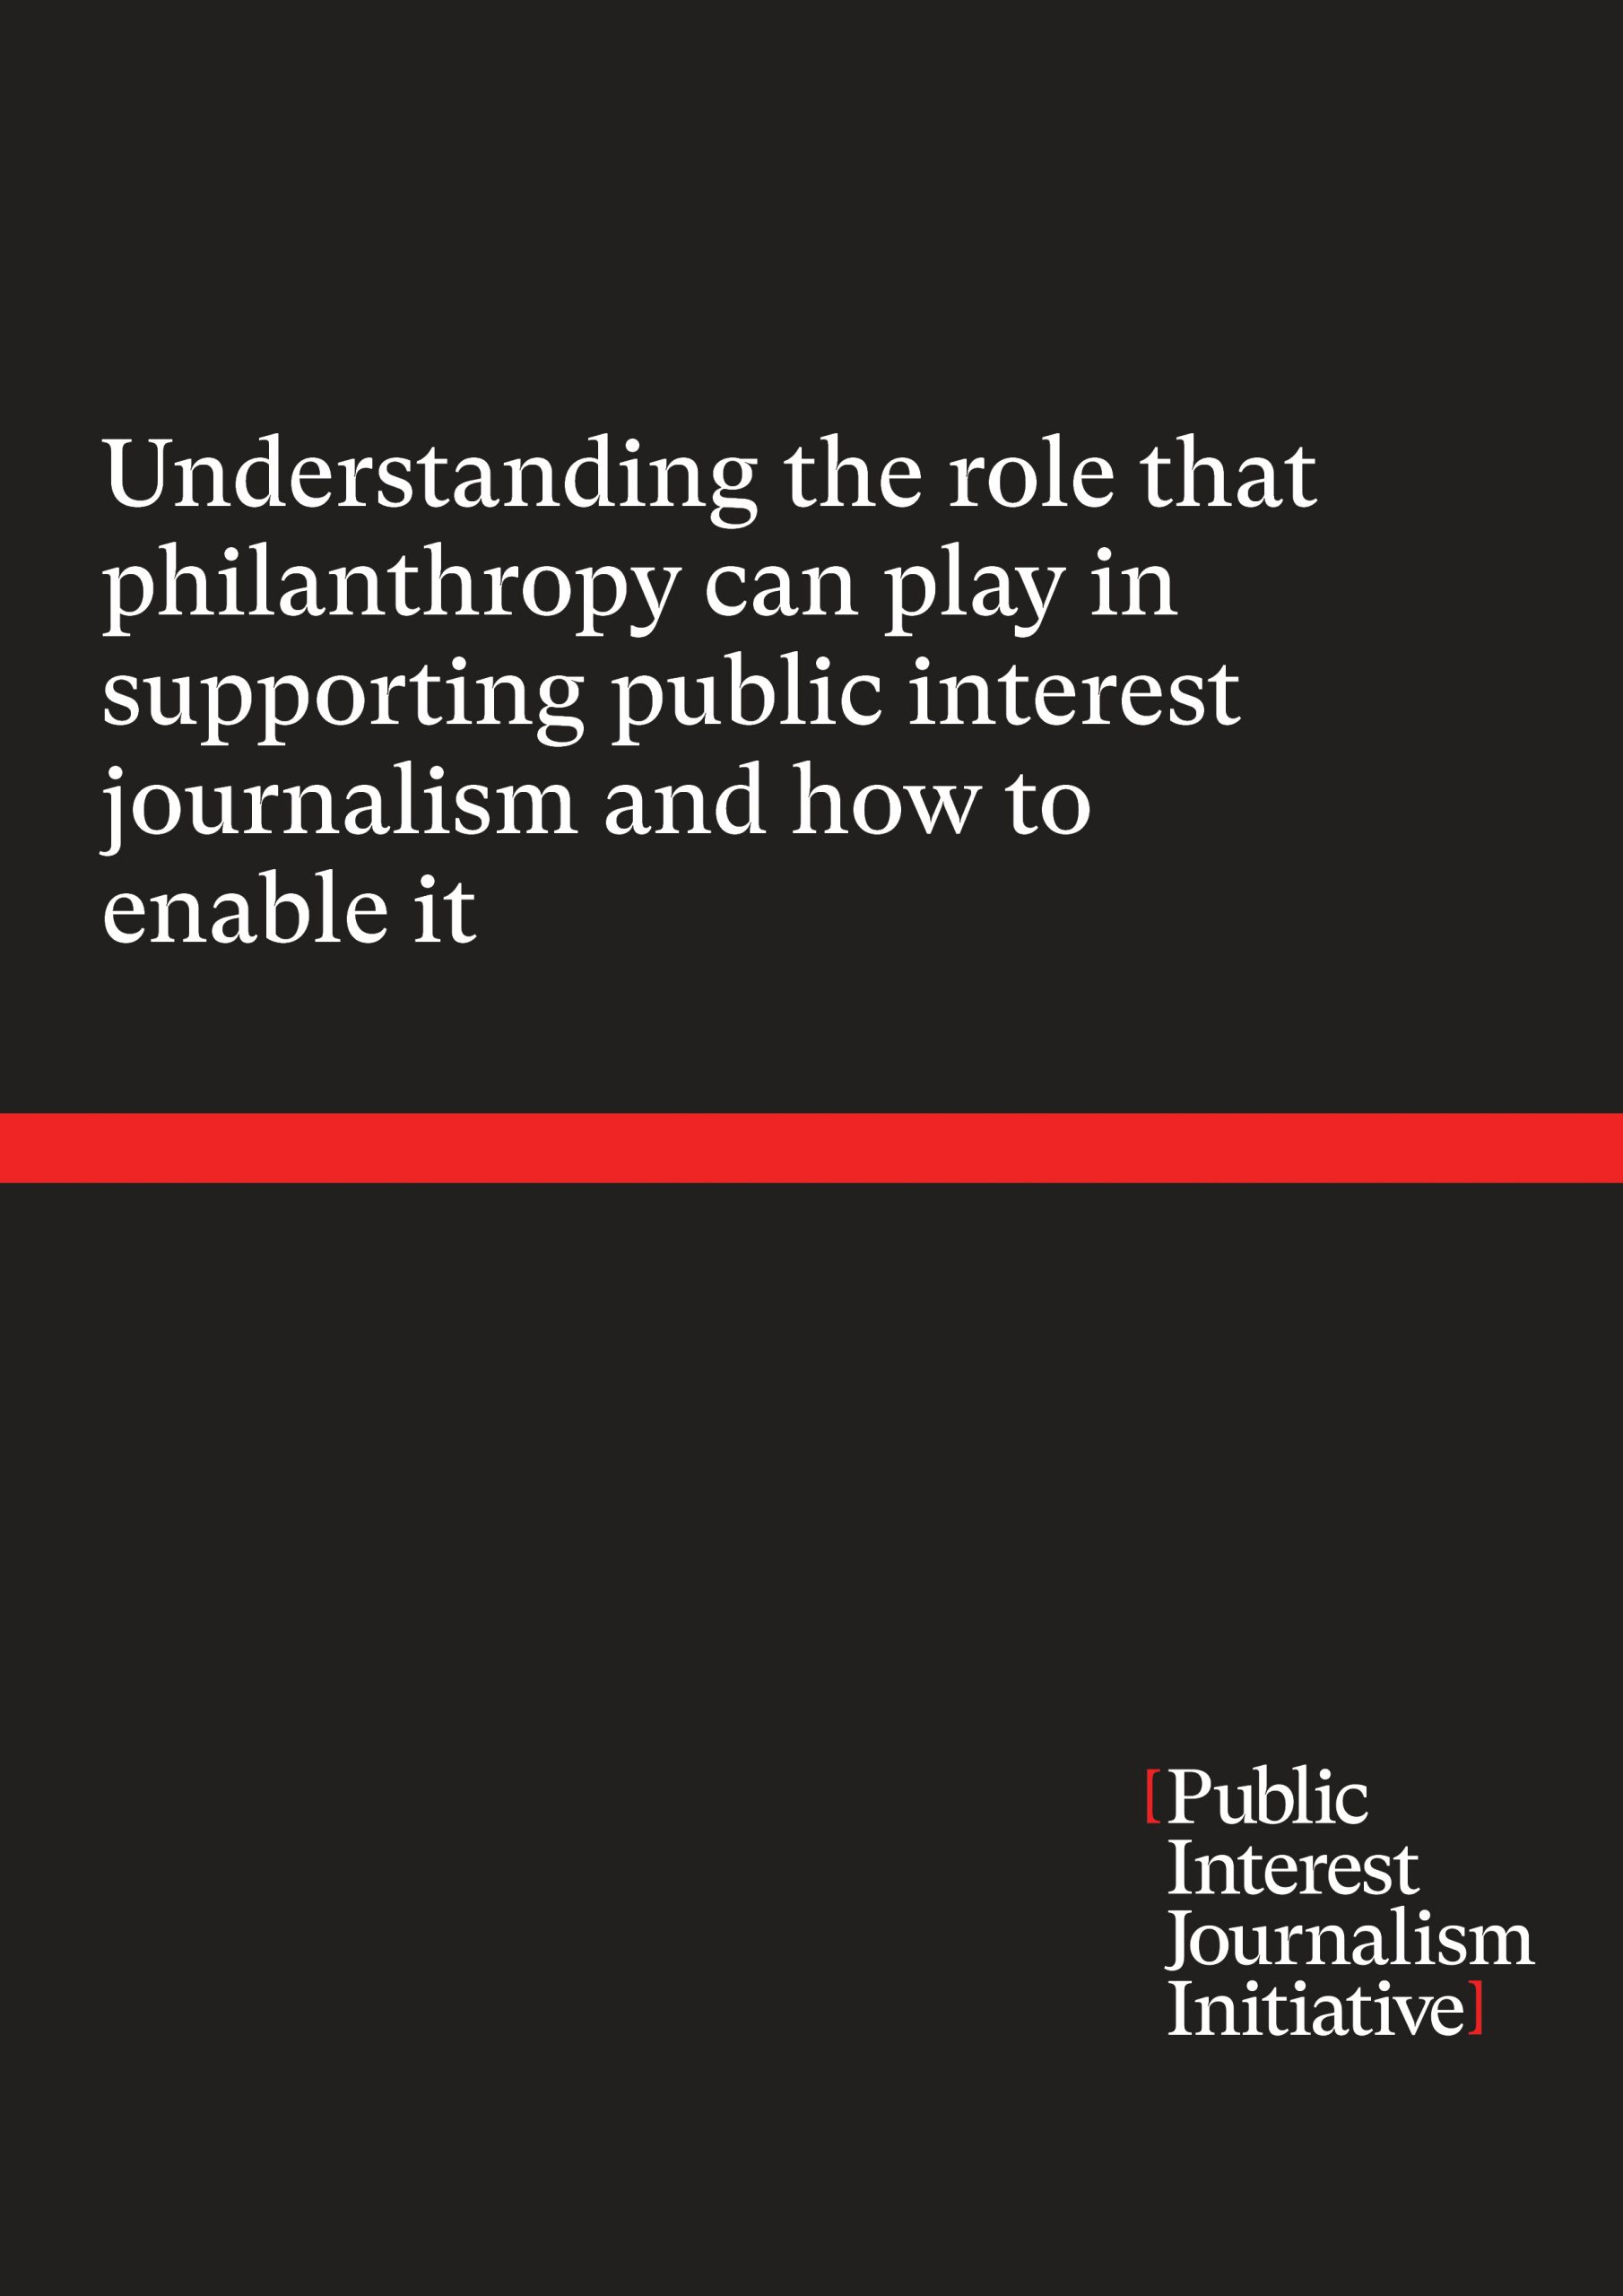 Cover page of Understanding the role that philanthropy can play in supporting public interest journalism and how to enable